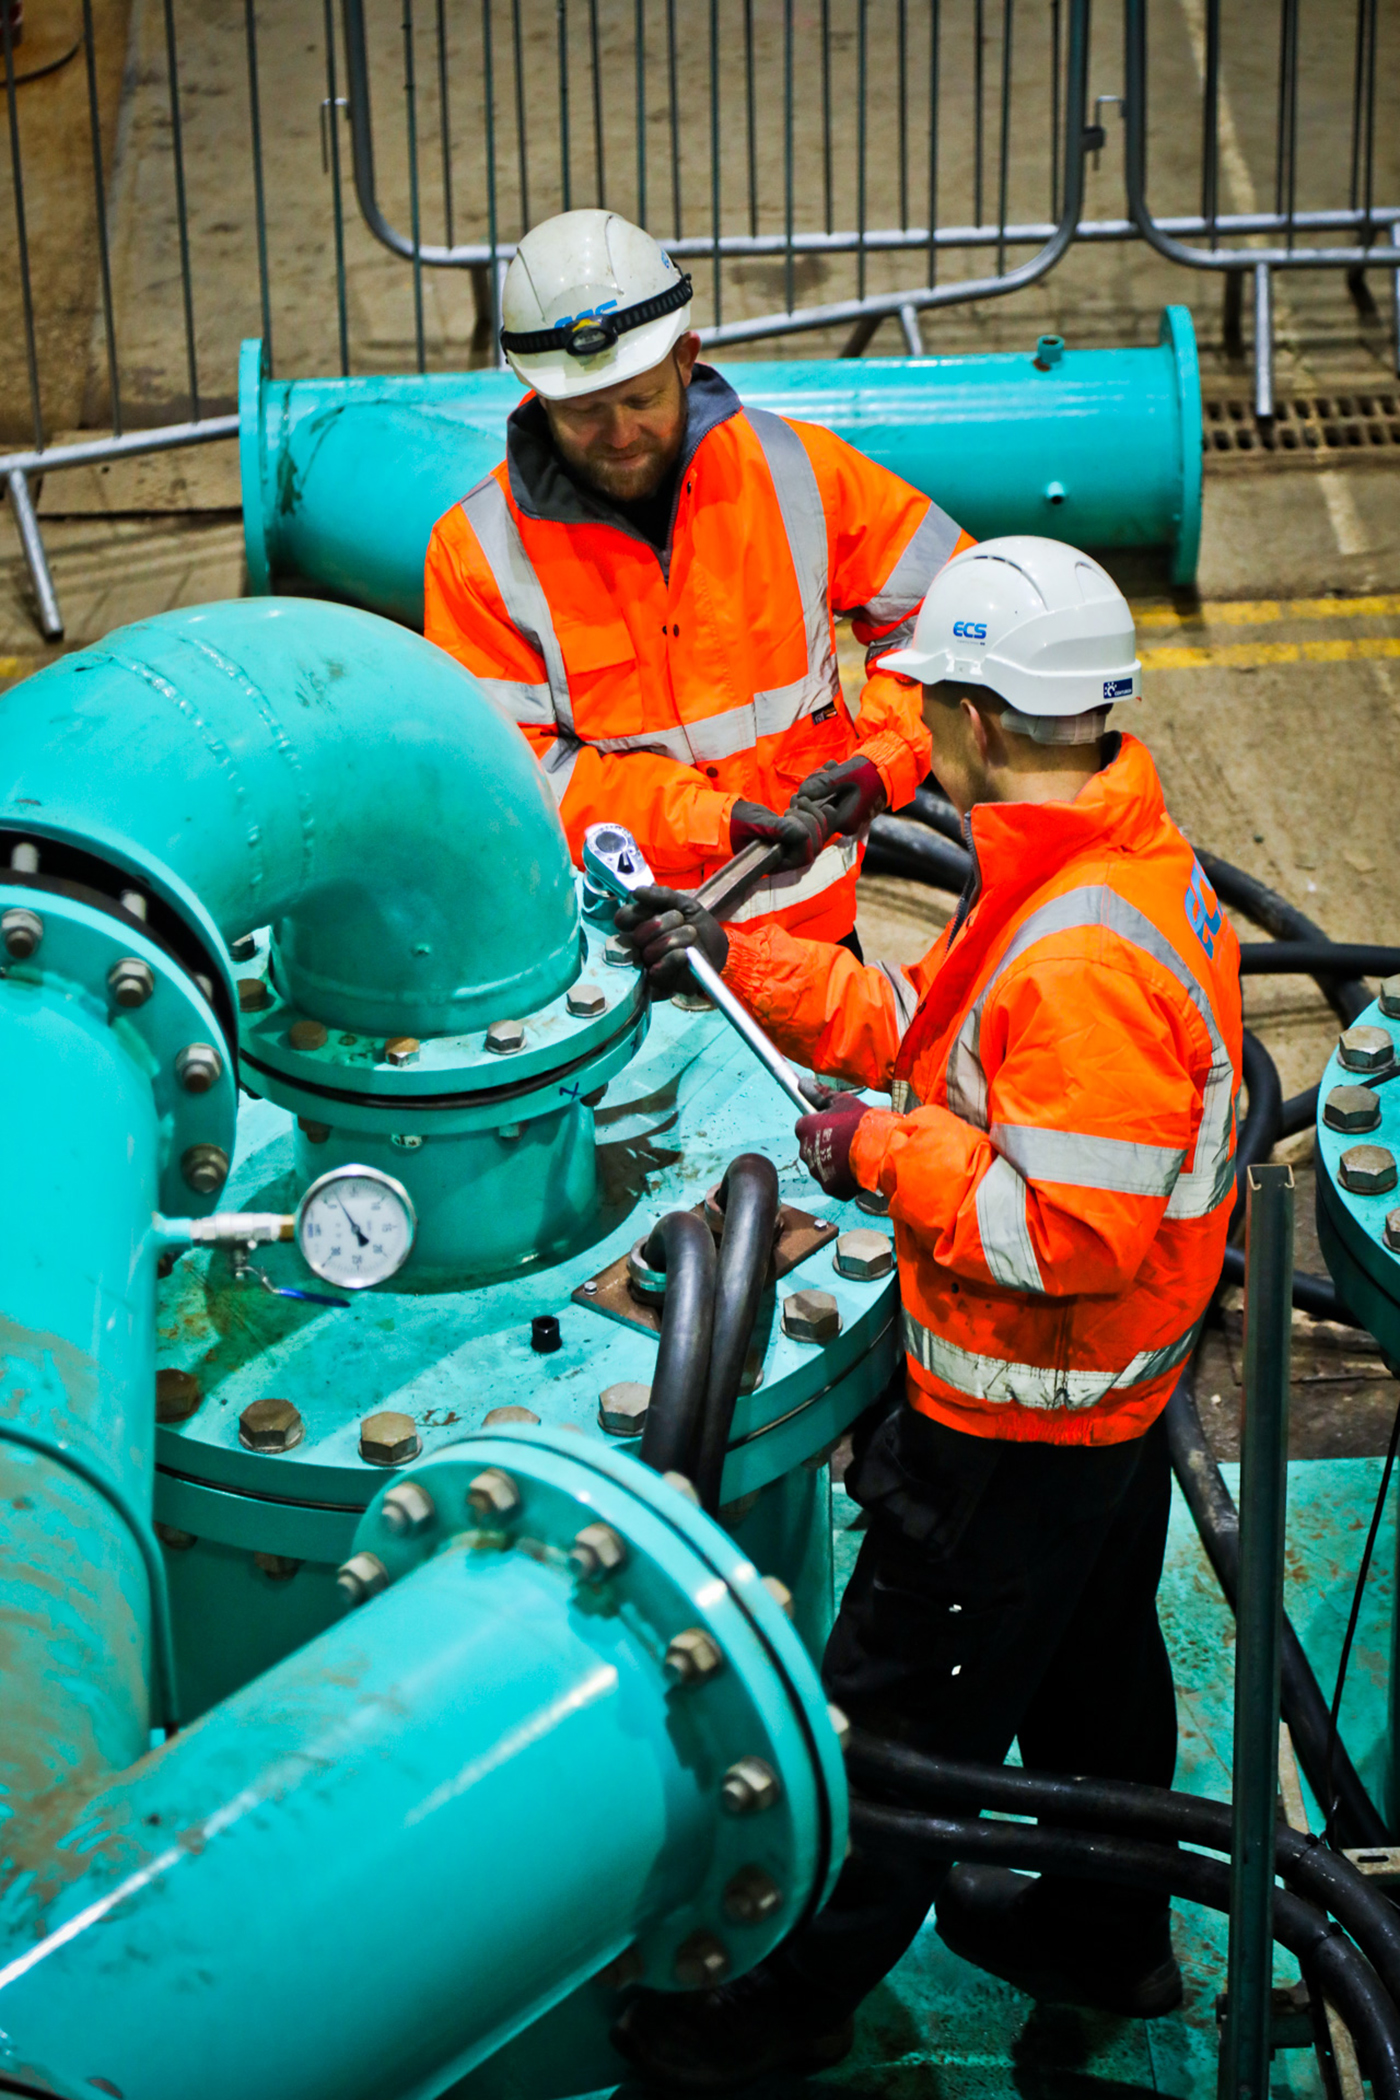 As one of the appointed MEICA framework contractors, ECS will support Anglian Water with comprehensive electromechanical services for infrastructure projects.